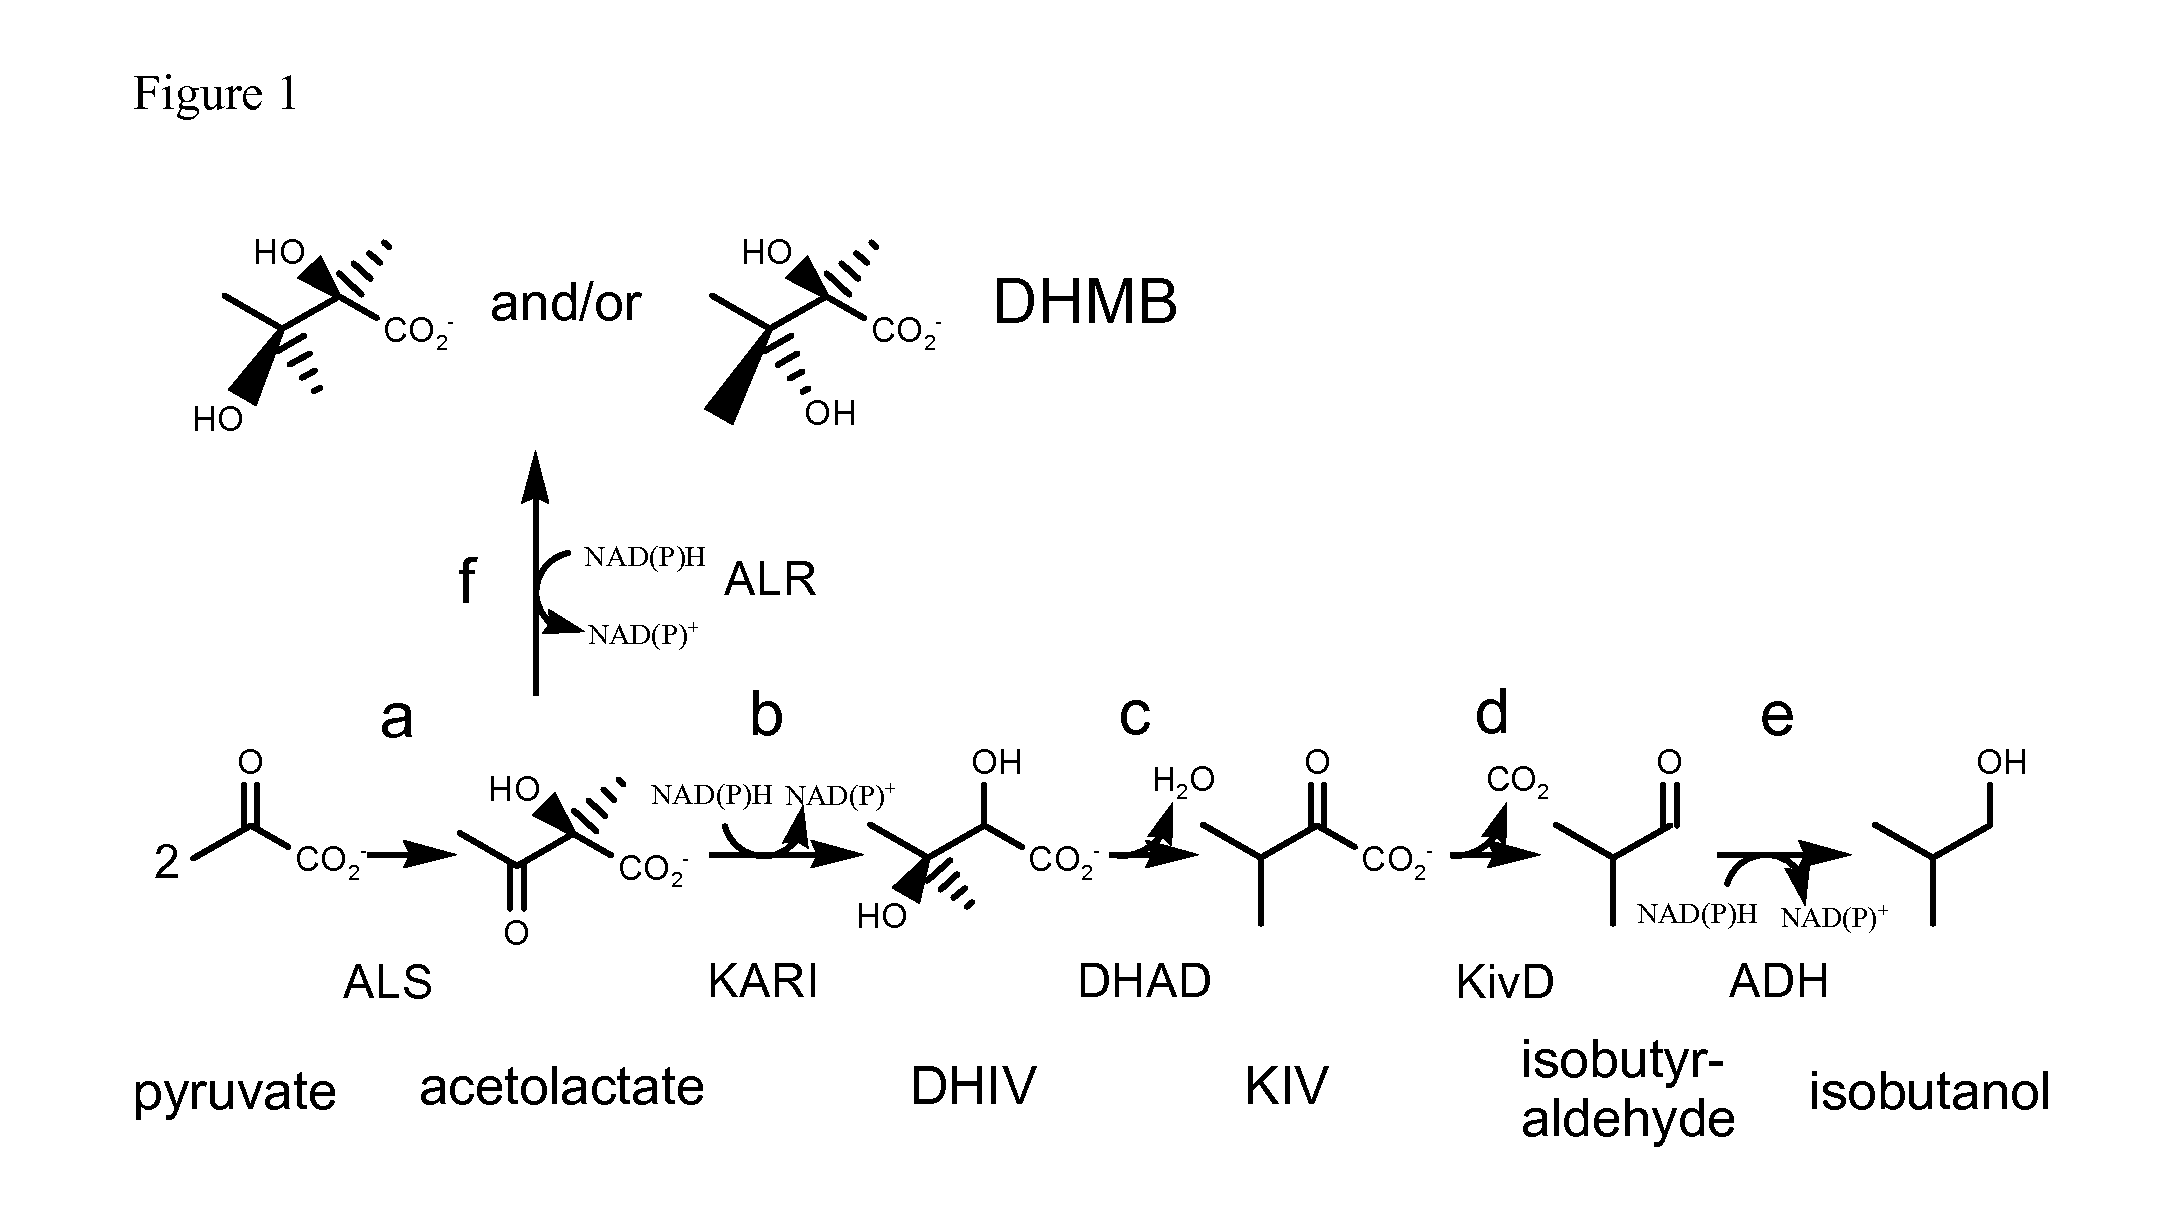 Reduction of 2,3-dihydroxy-2-methyl butyrate (DHMB) in butanol production